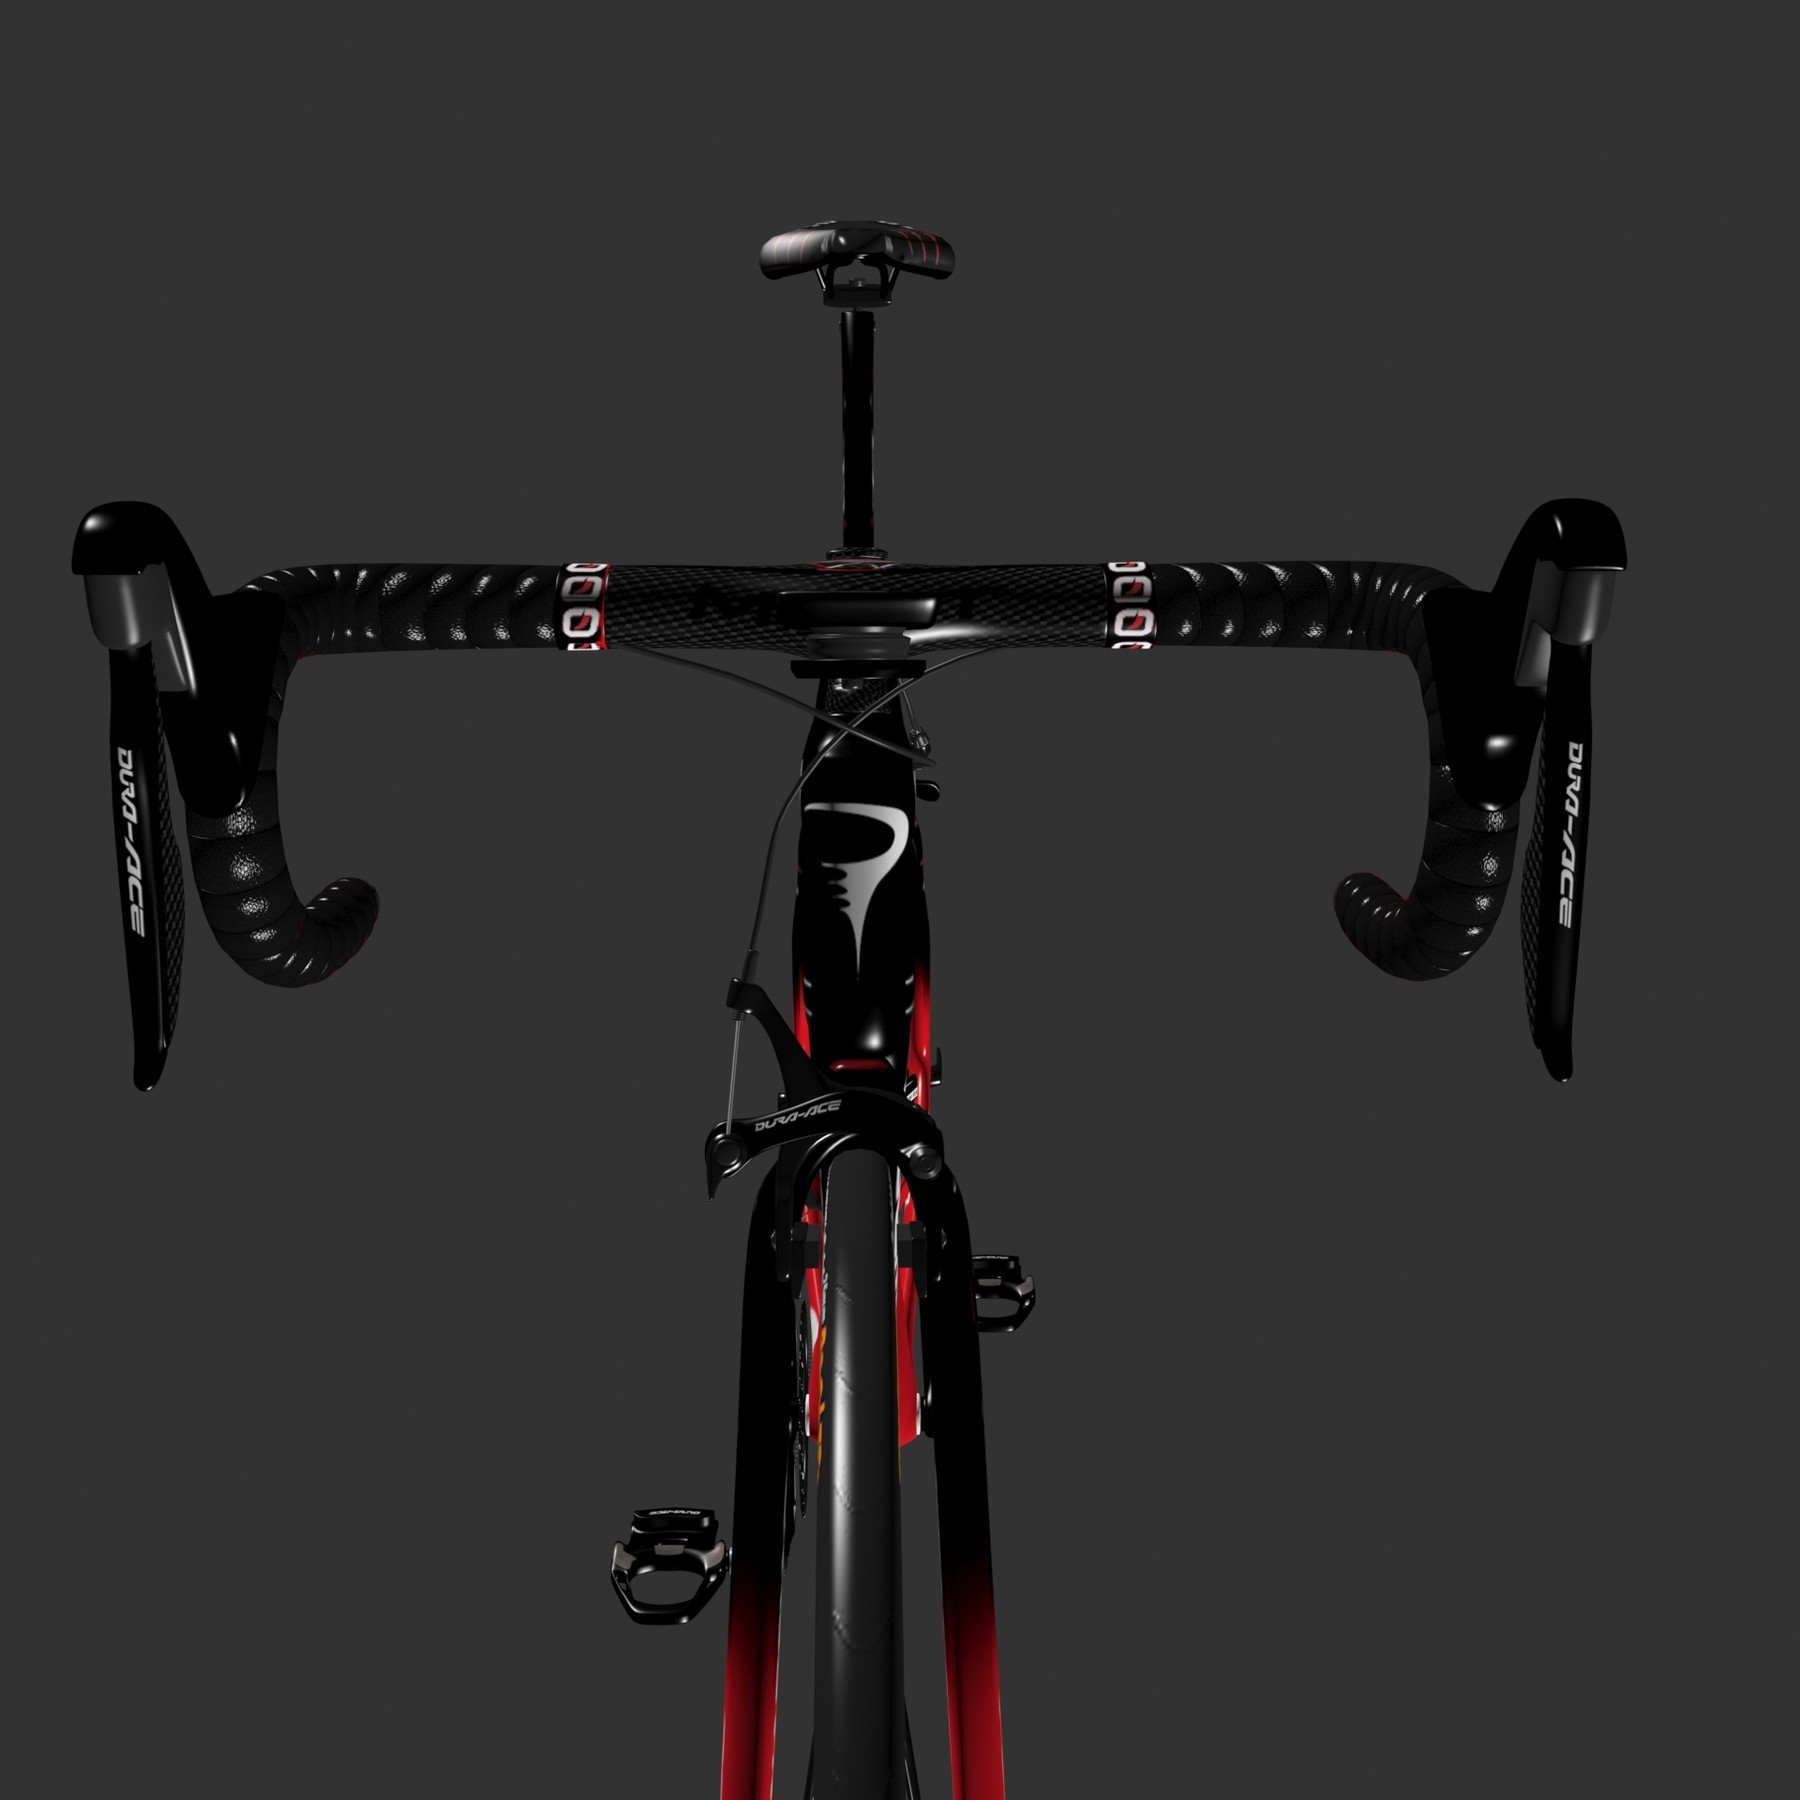 Pinarello Dogma F12 preview: 'Beyond the reach – and wallets – of mortals', Technology